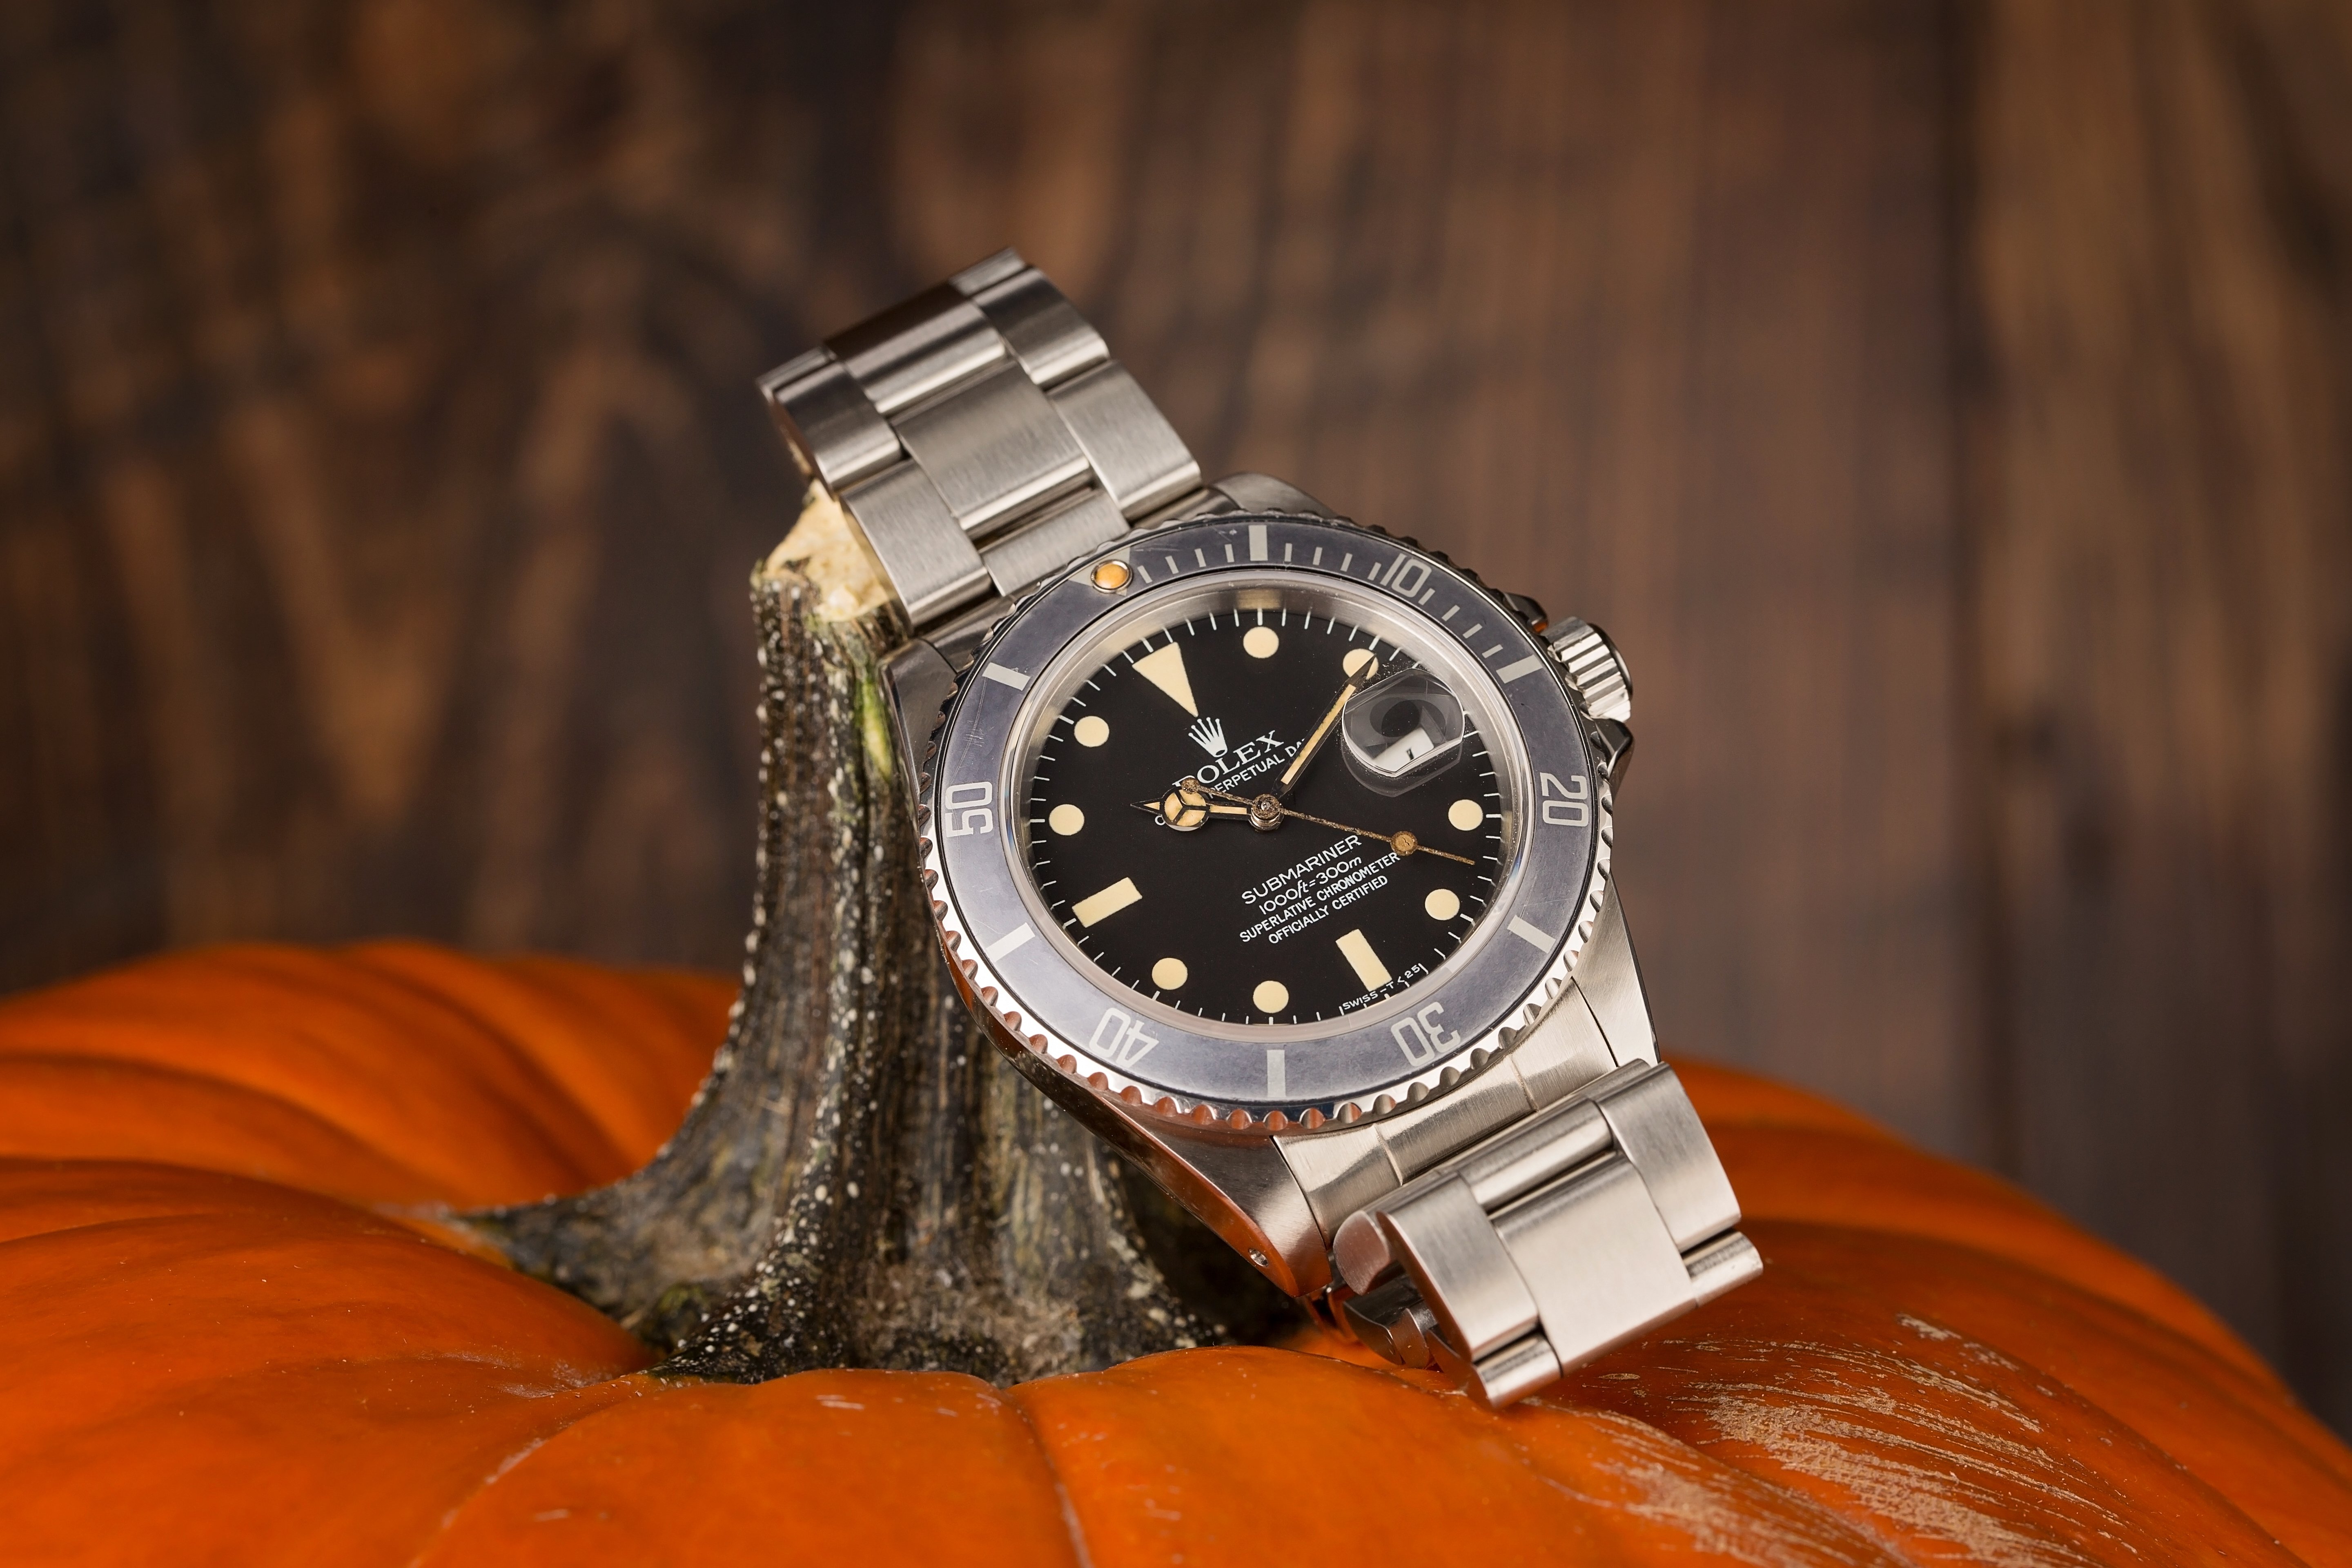 Ghost Bezel Rolex Watches: The perfect 